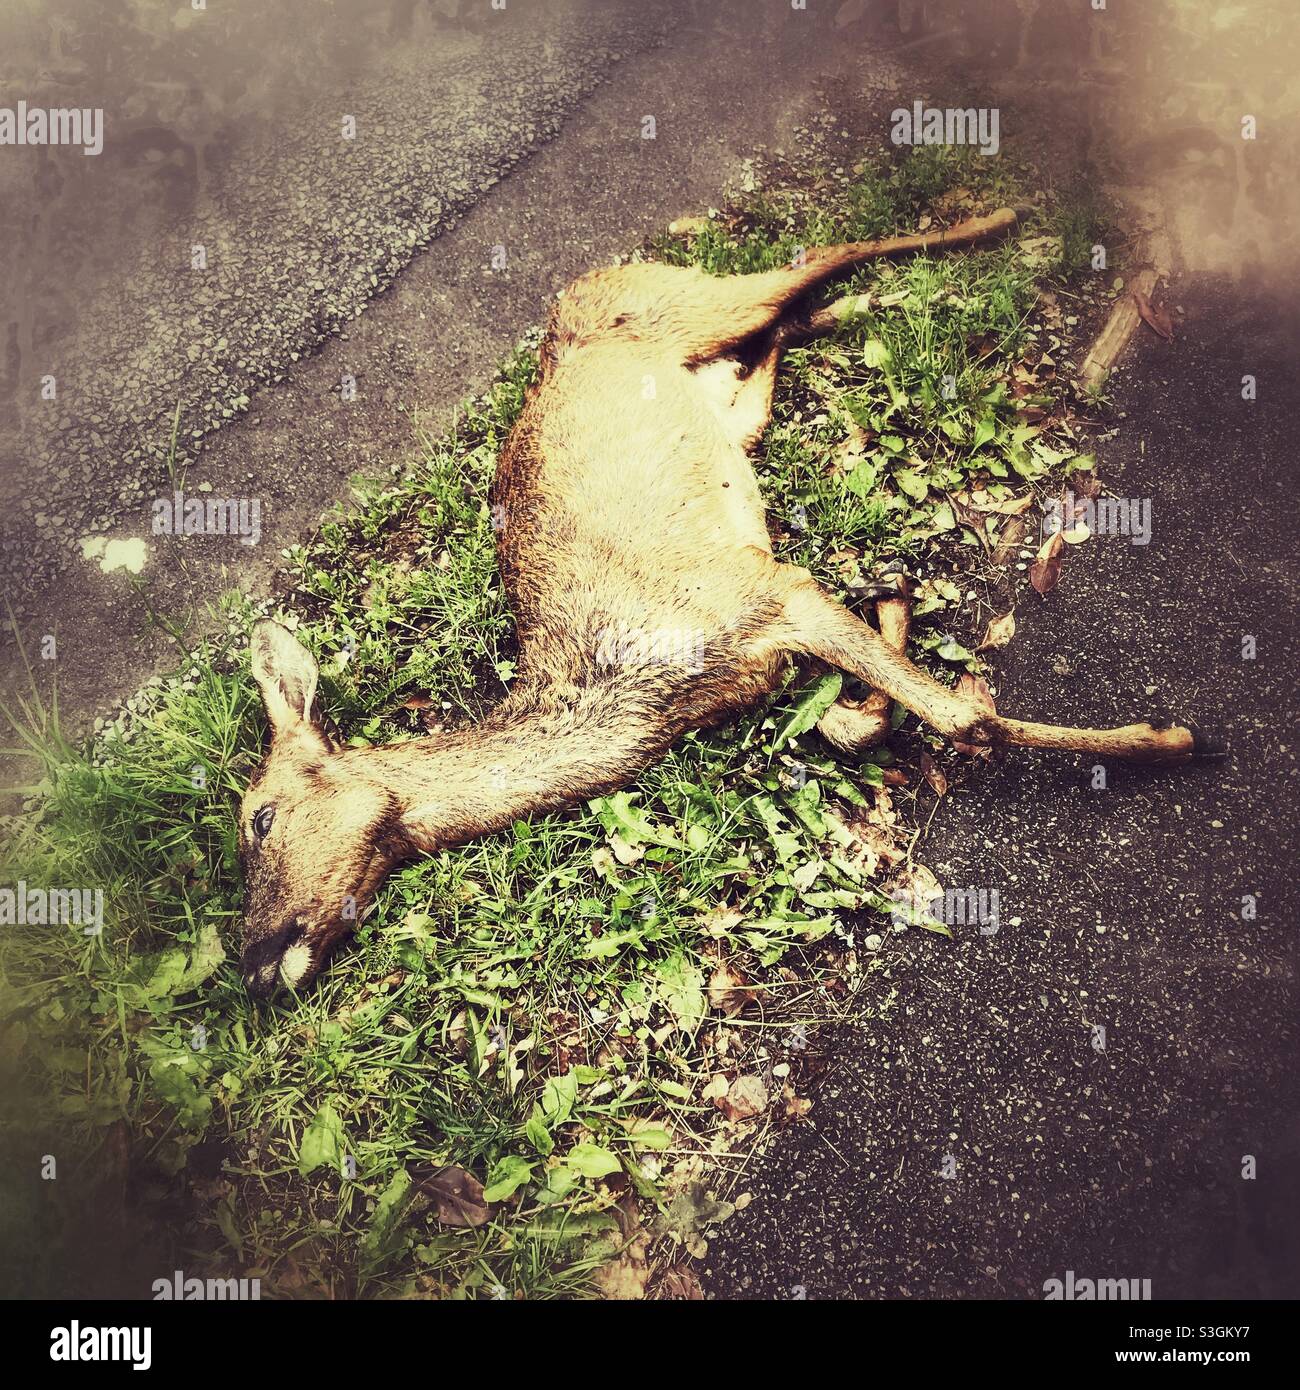 Young deer killed on the road, Medstead, Hampshire, England, United Kingdom. Stock Photo